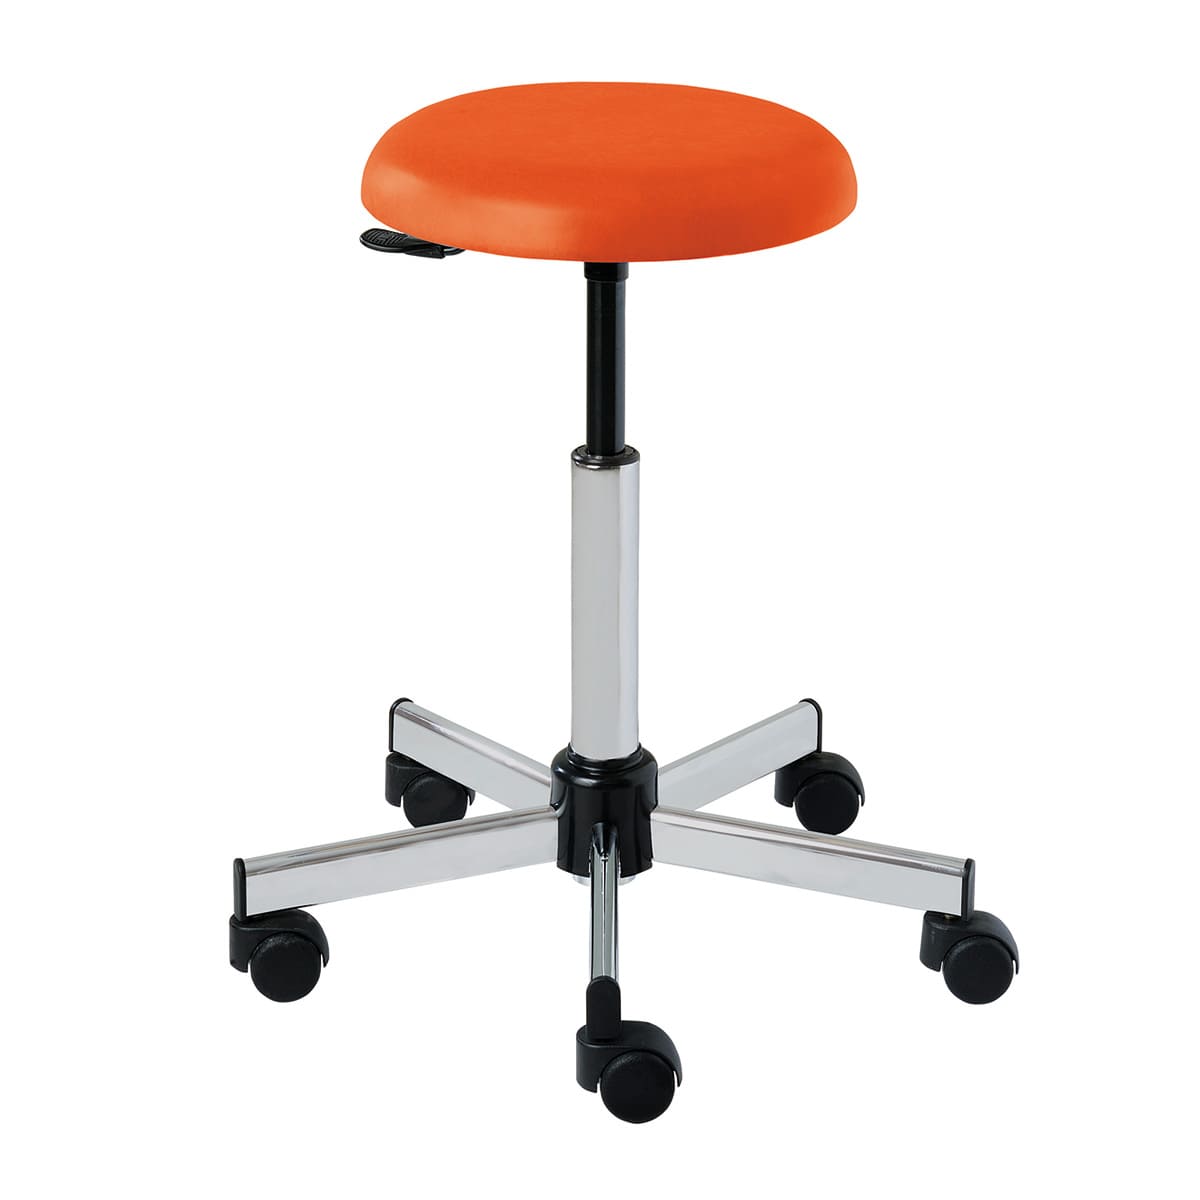 Stool with round seat, stainless steel base